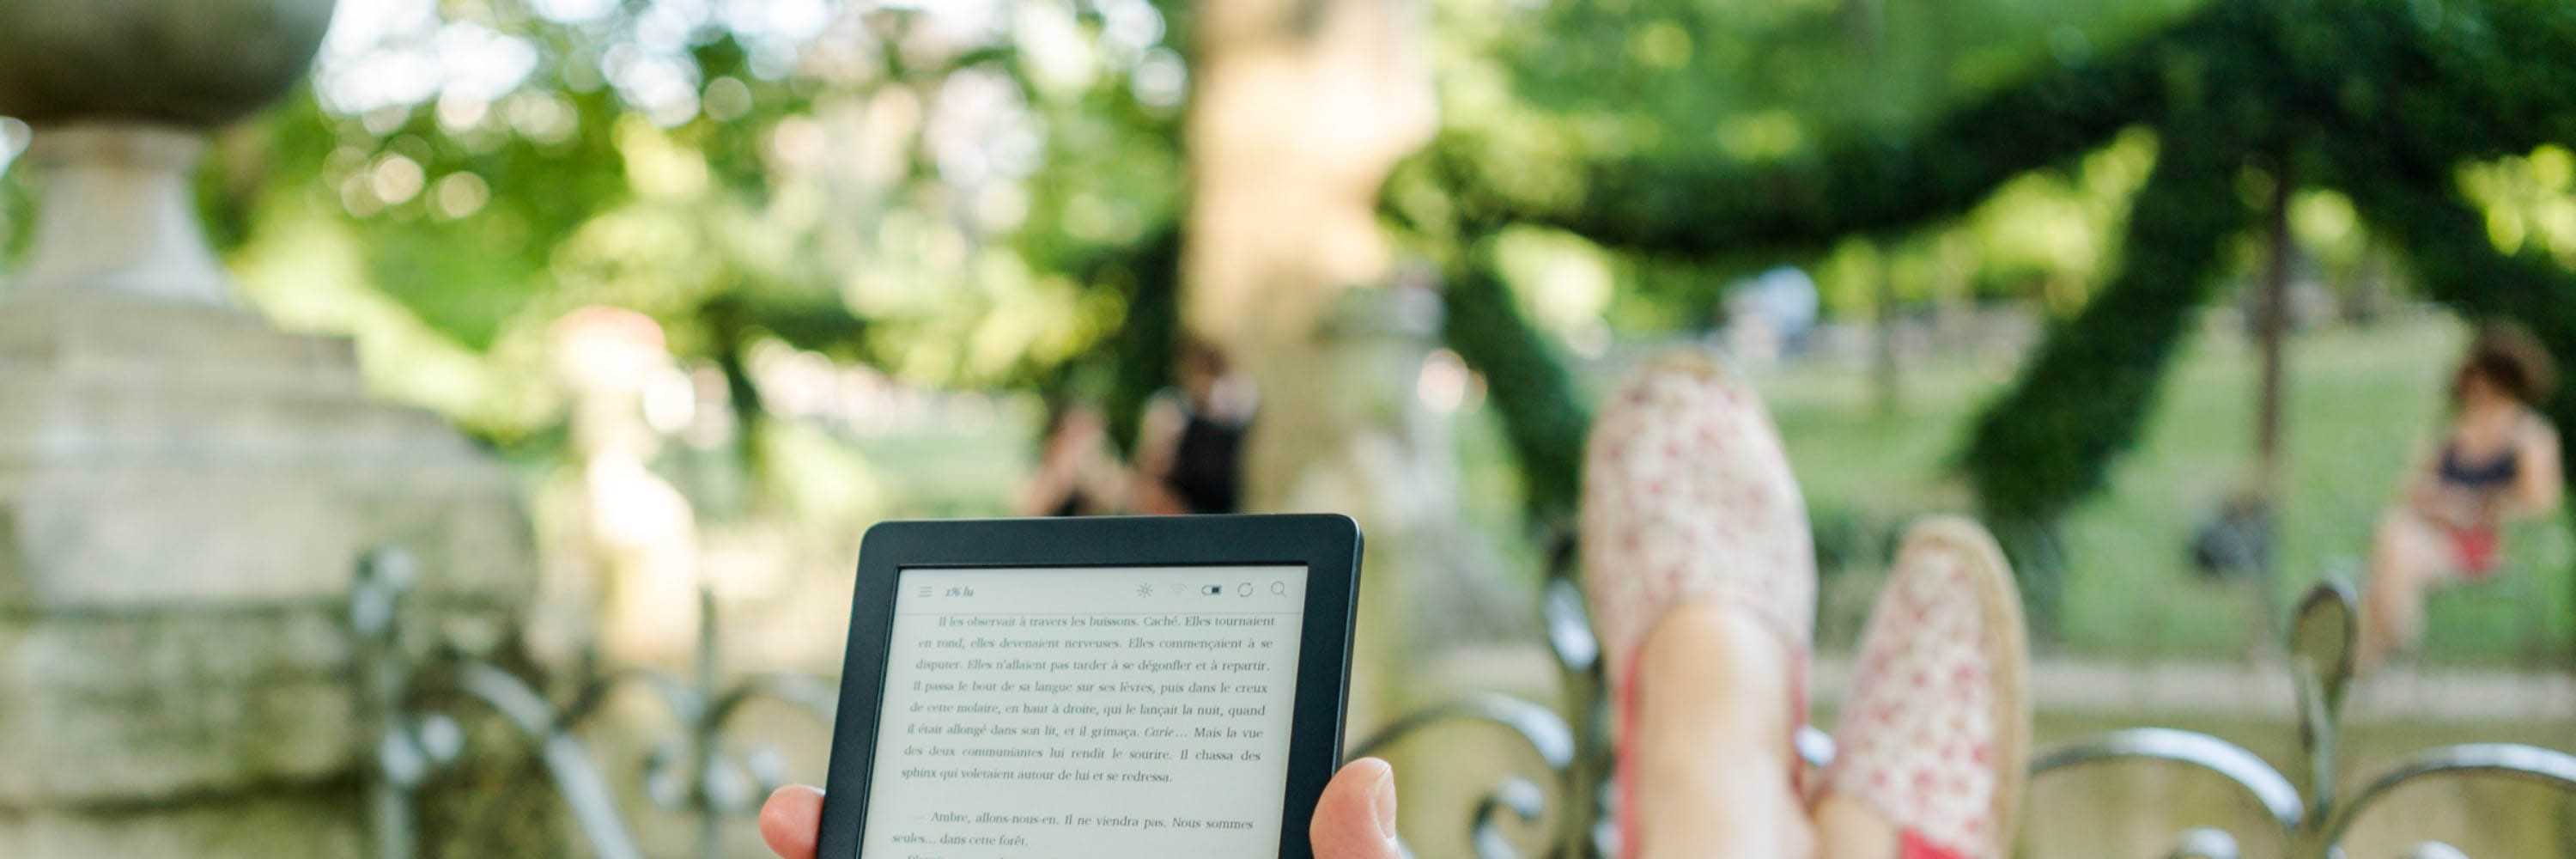 Best time to buy an e-reader